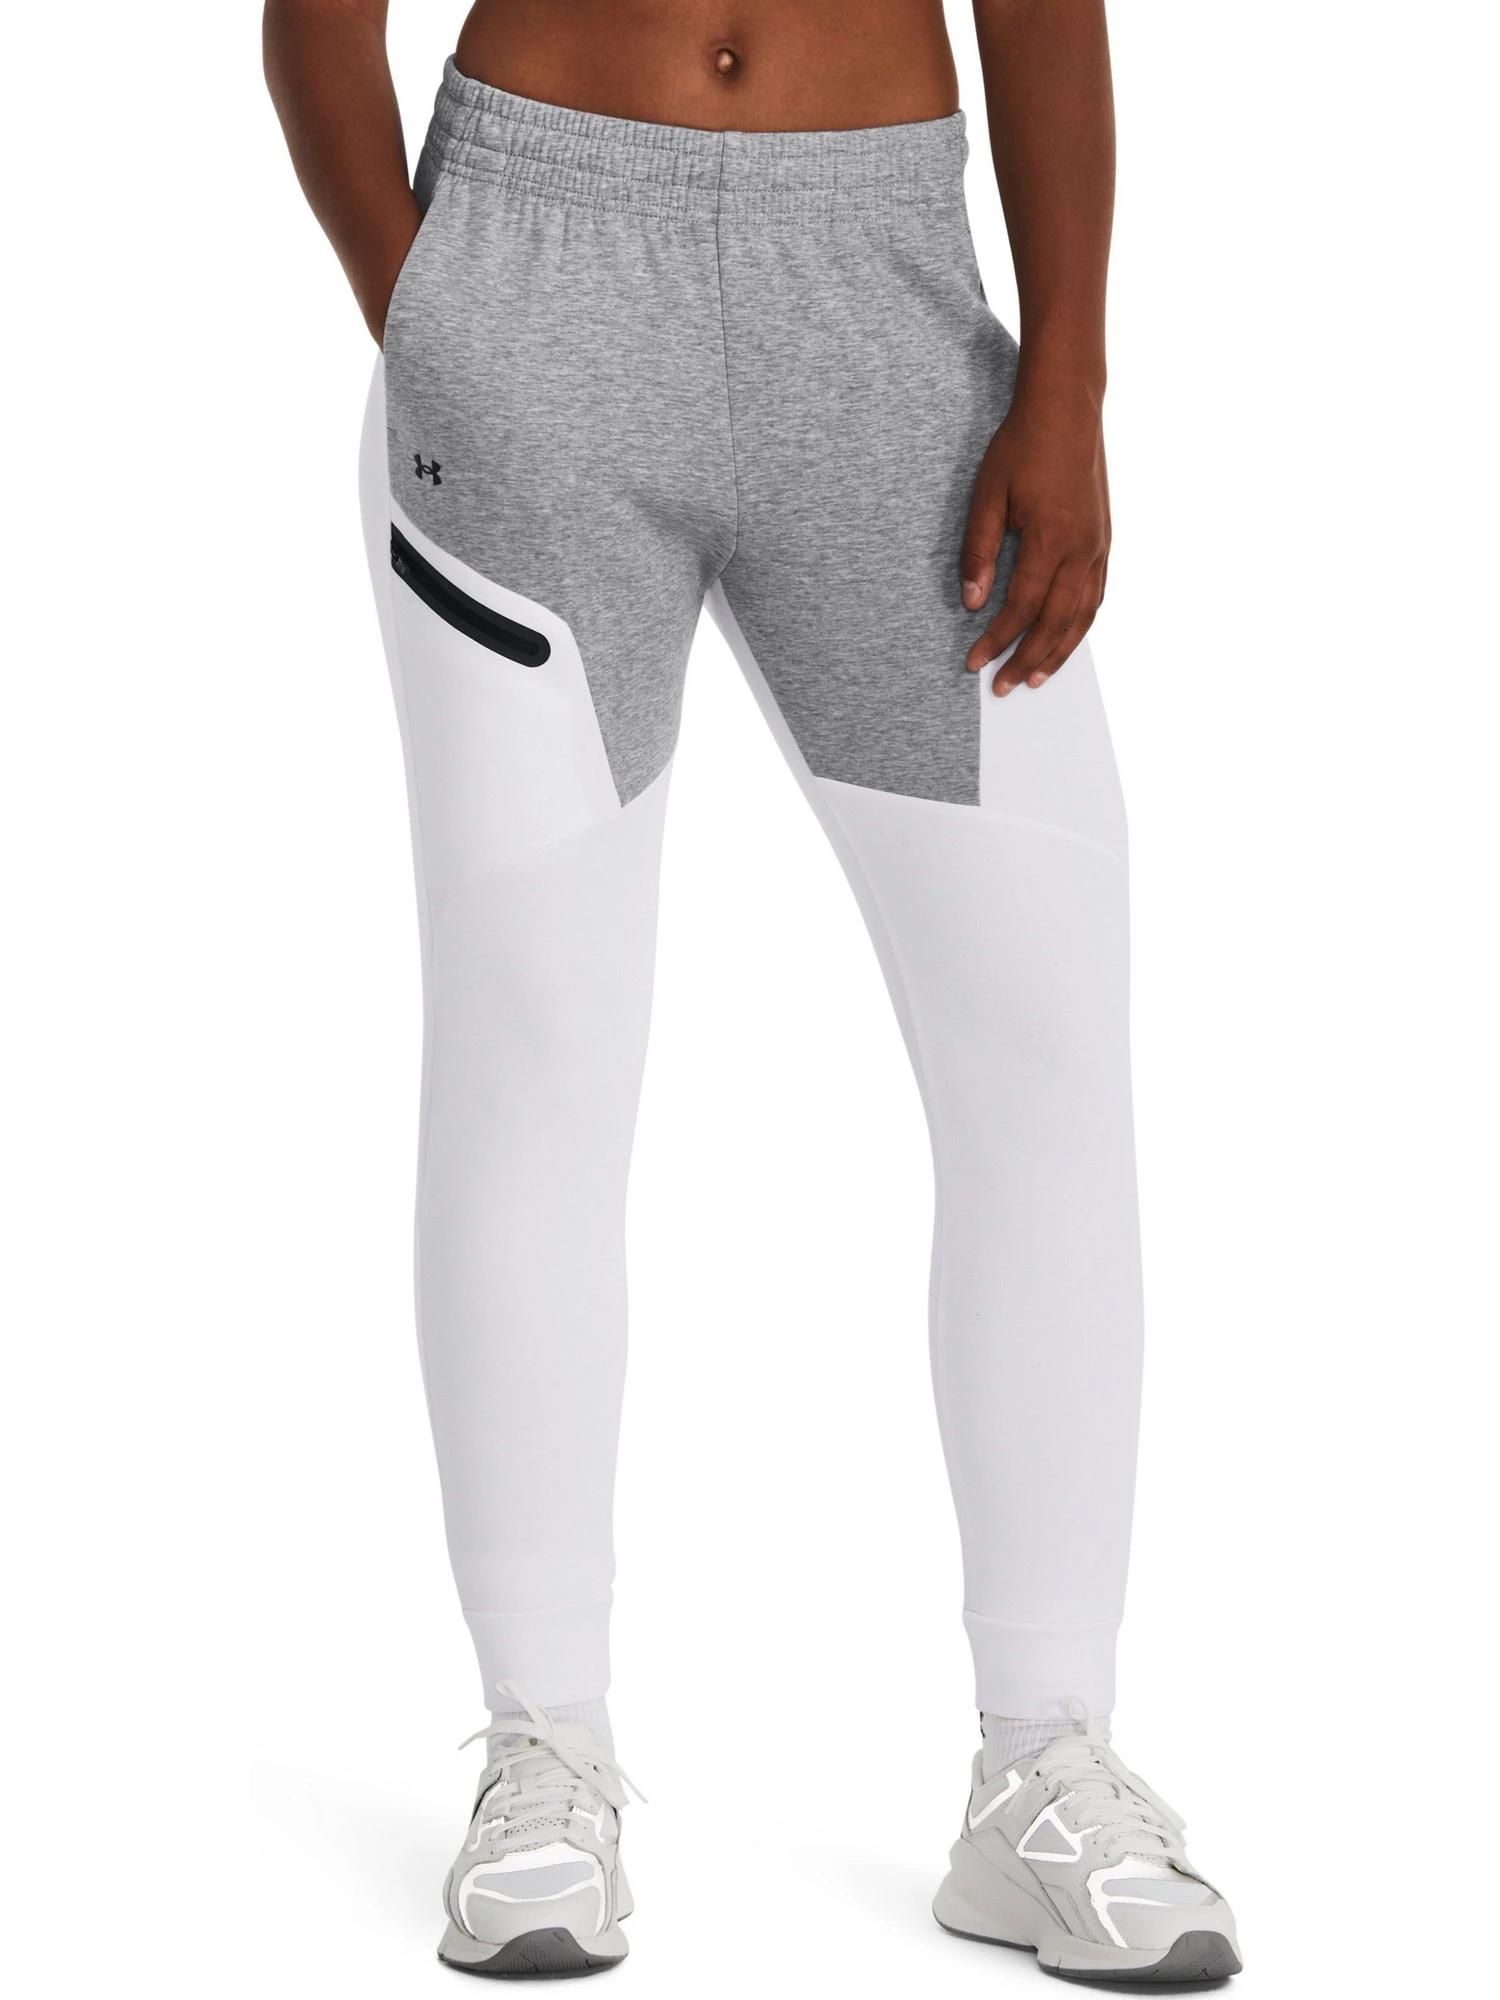 Under Armour Unstoppable Flc Jogger